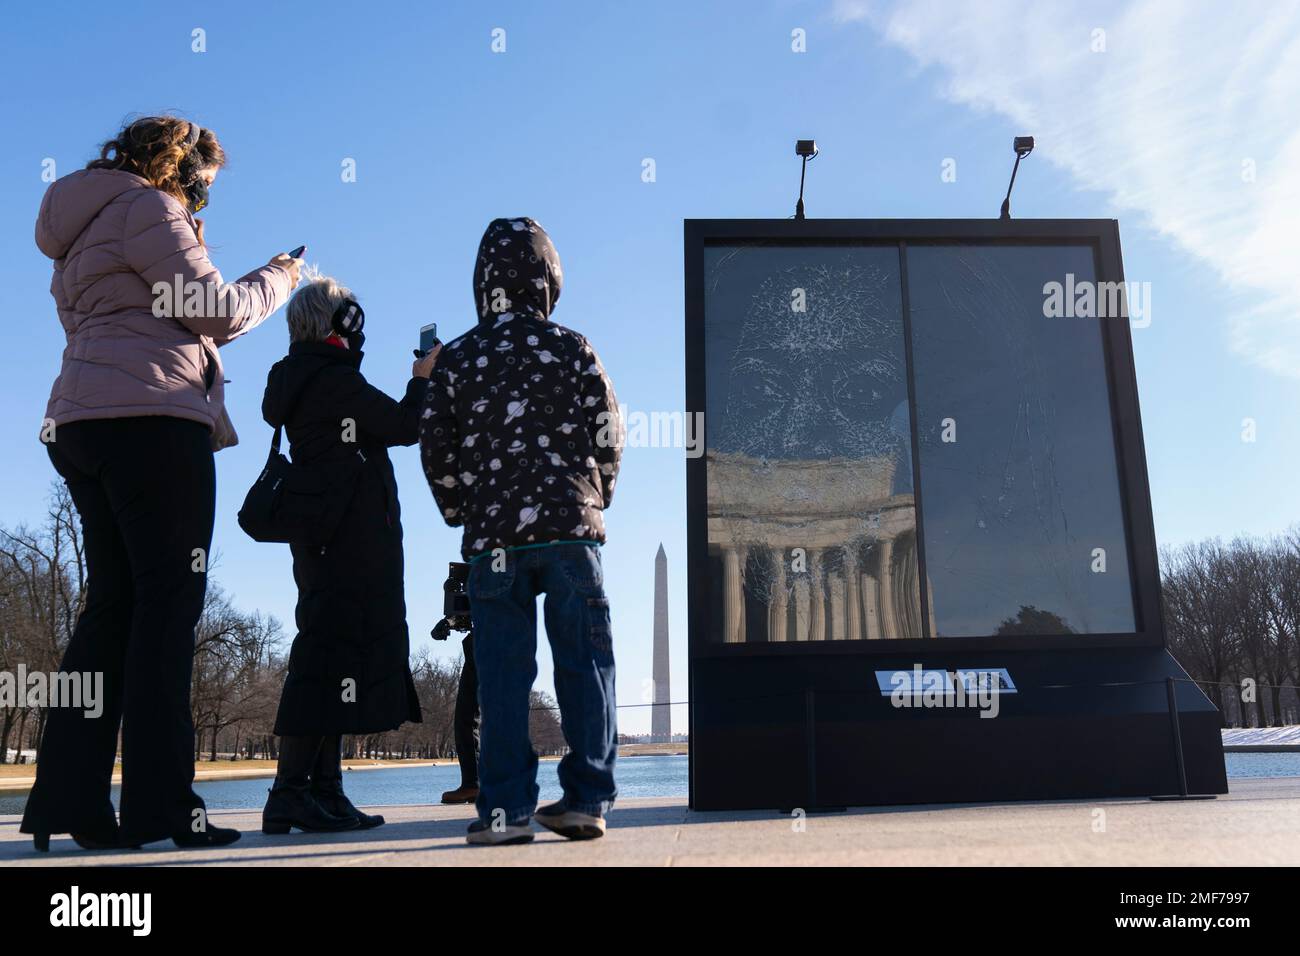 People photograph the installation Vice President Kamala Harris Glass  Ceiling Breaker at the Lincoln Memorial in Washington, Wednesday, Feb. 4,  2021. Vice President Kamala Harris' barrier-breaking career has been  memorialized in a